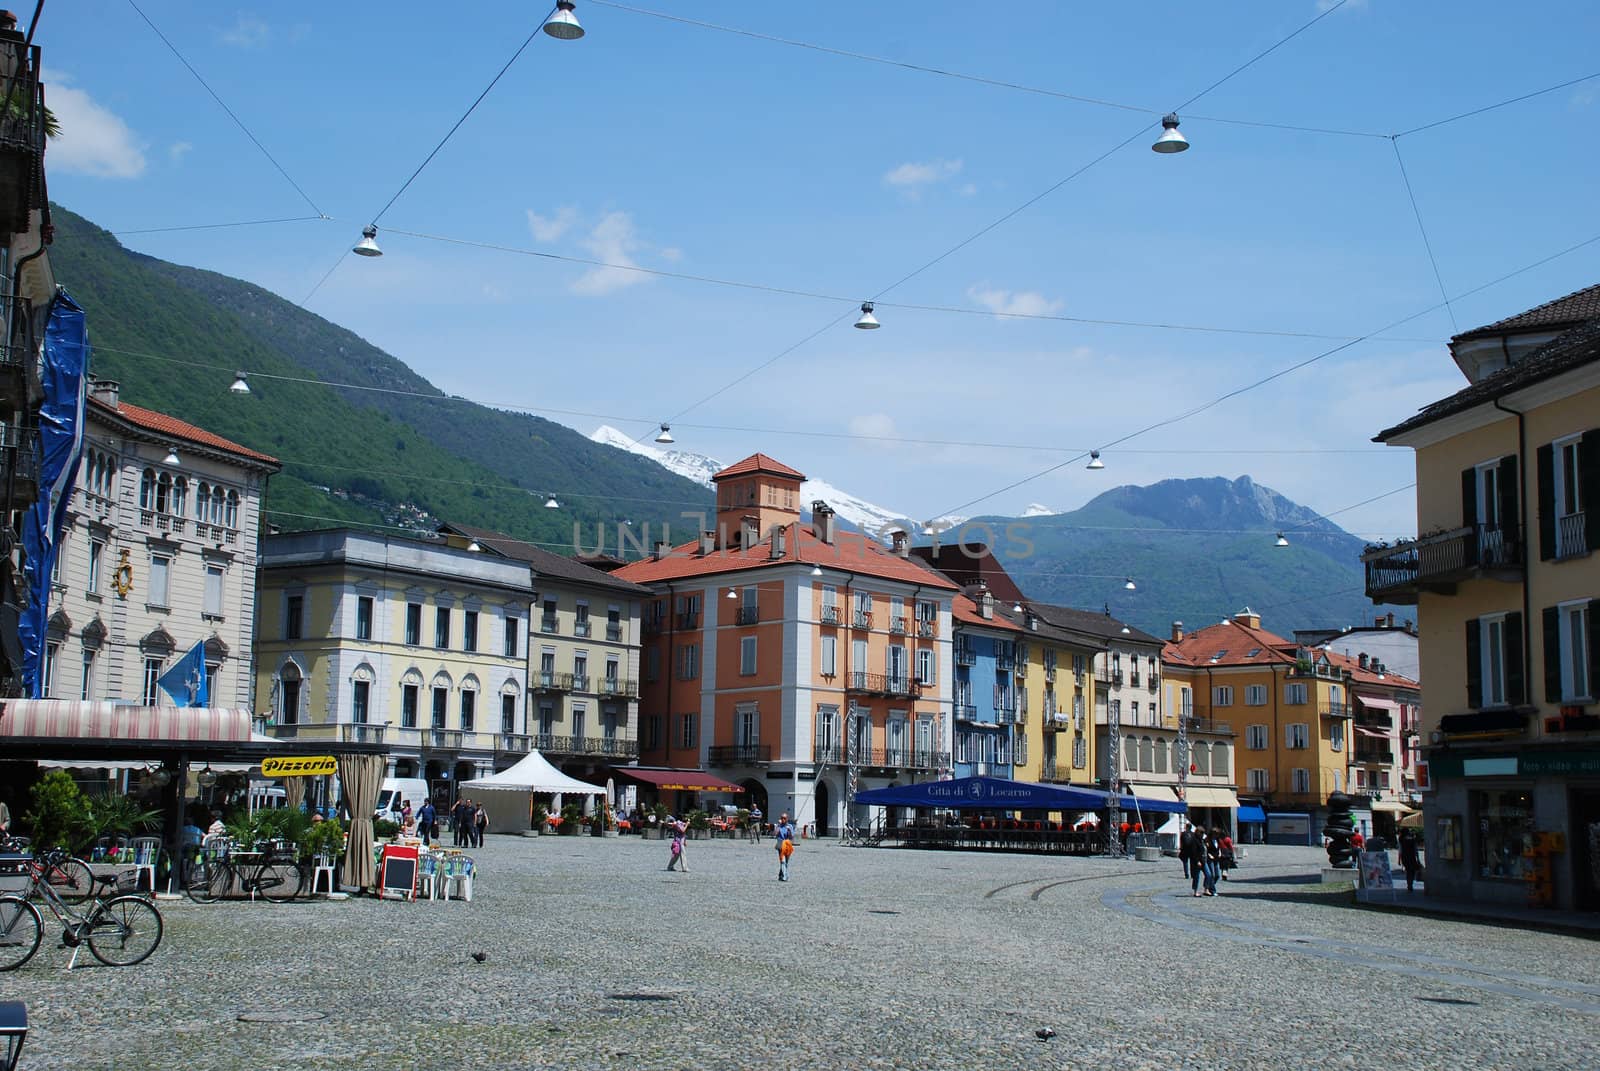 In the city center of Lucarno the Piazza grande is nice wolking place, there are restaurantes and bars, shops.  In back side we can see alp mountains still snow covered in spite of end of May